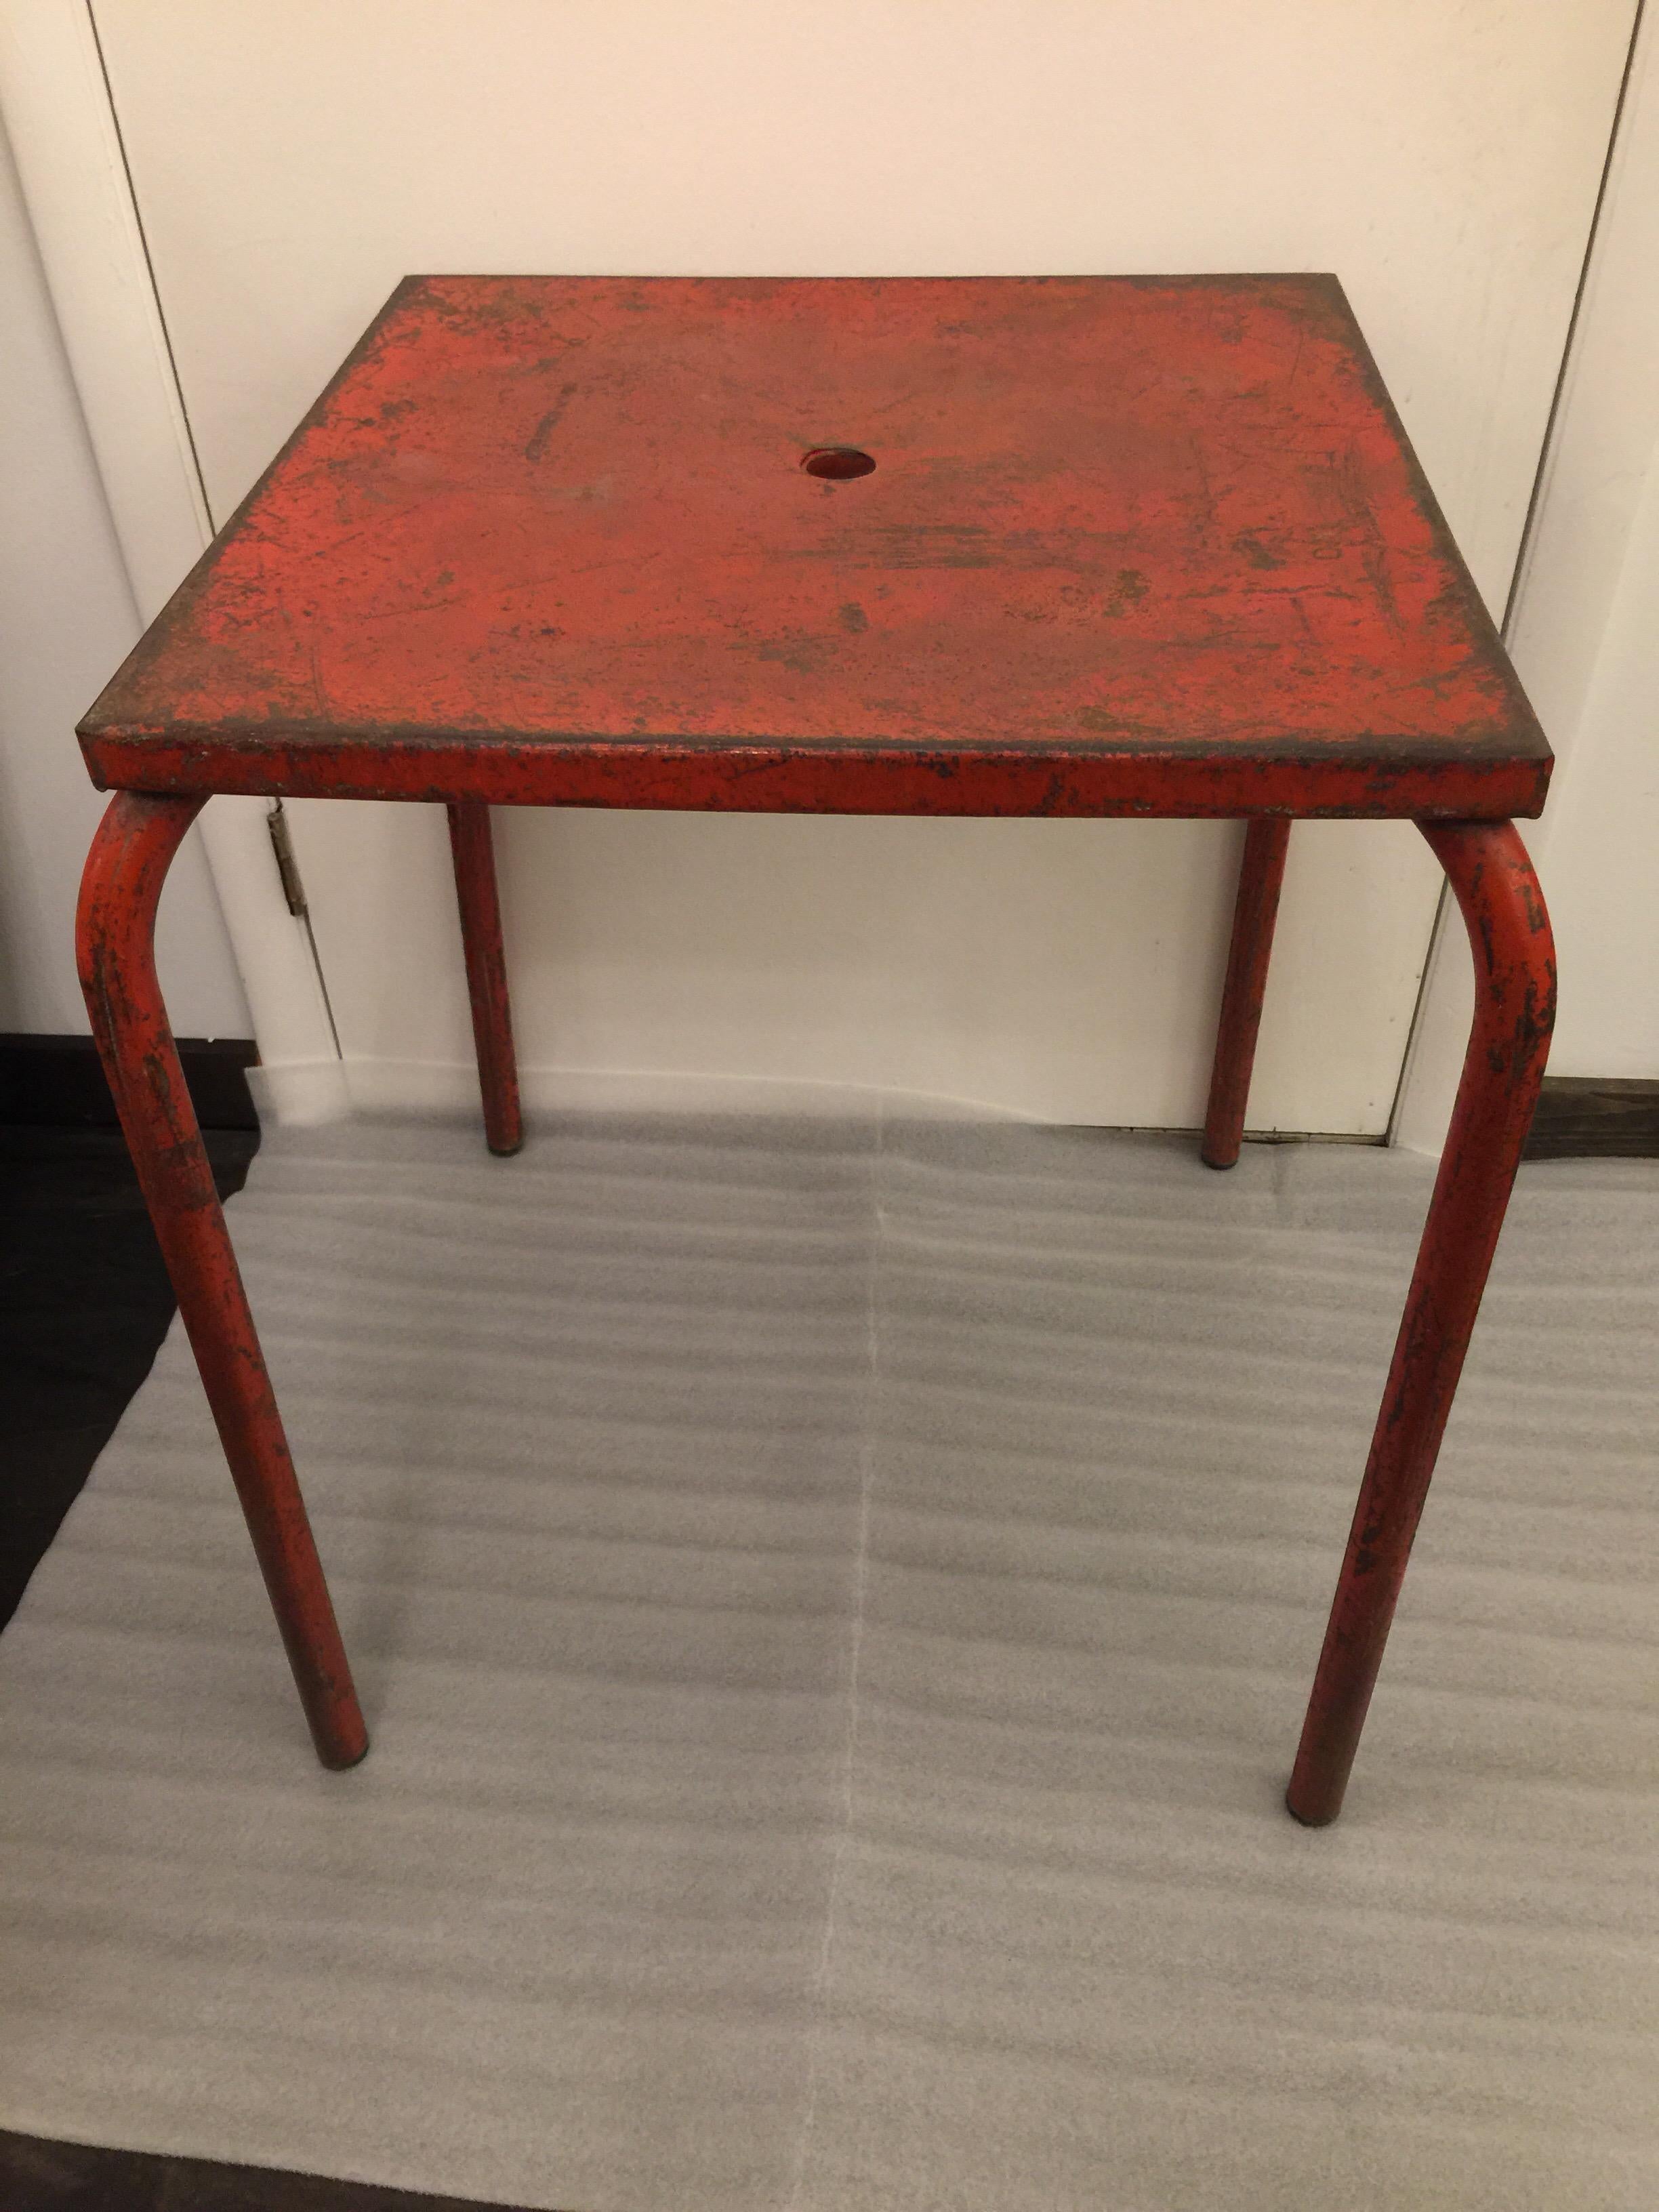 Beautifully distressed through the years of being outside and earning a rich patina. This Jean Prouvé attributed table has a deep classic red paint which is classic Prouvé. This table will make a great side table or game table - just stunning!

 